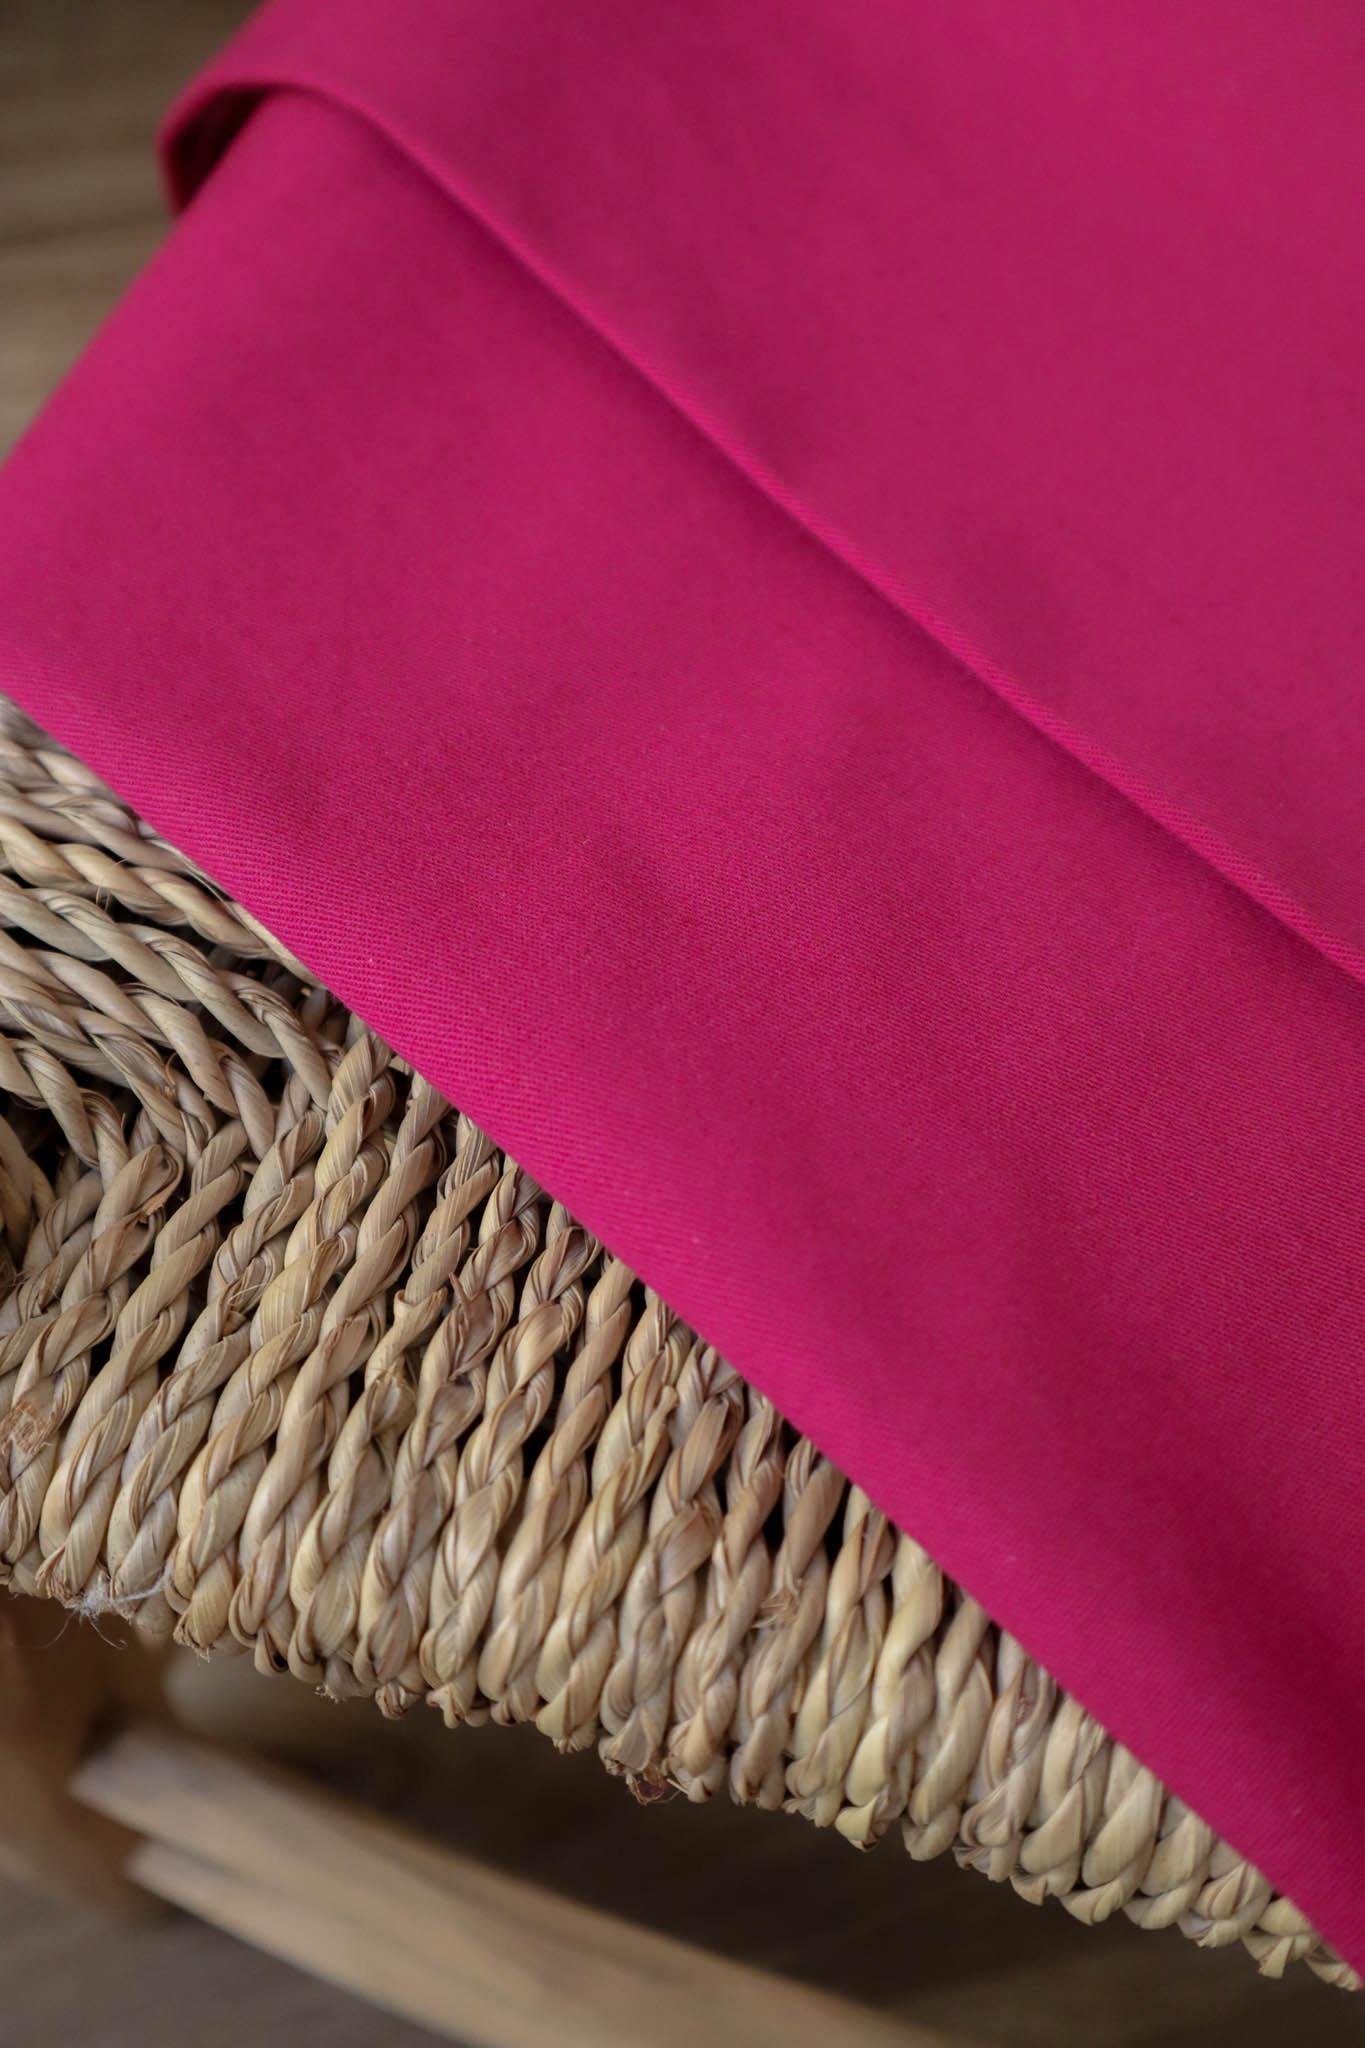 REMNANT 0.58 Metre - Lise Tailor - Pink Gabardine Stretch Cotton Fabric